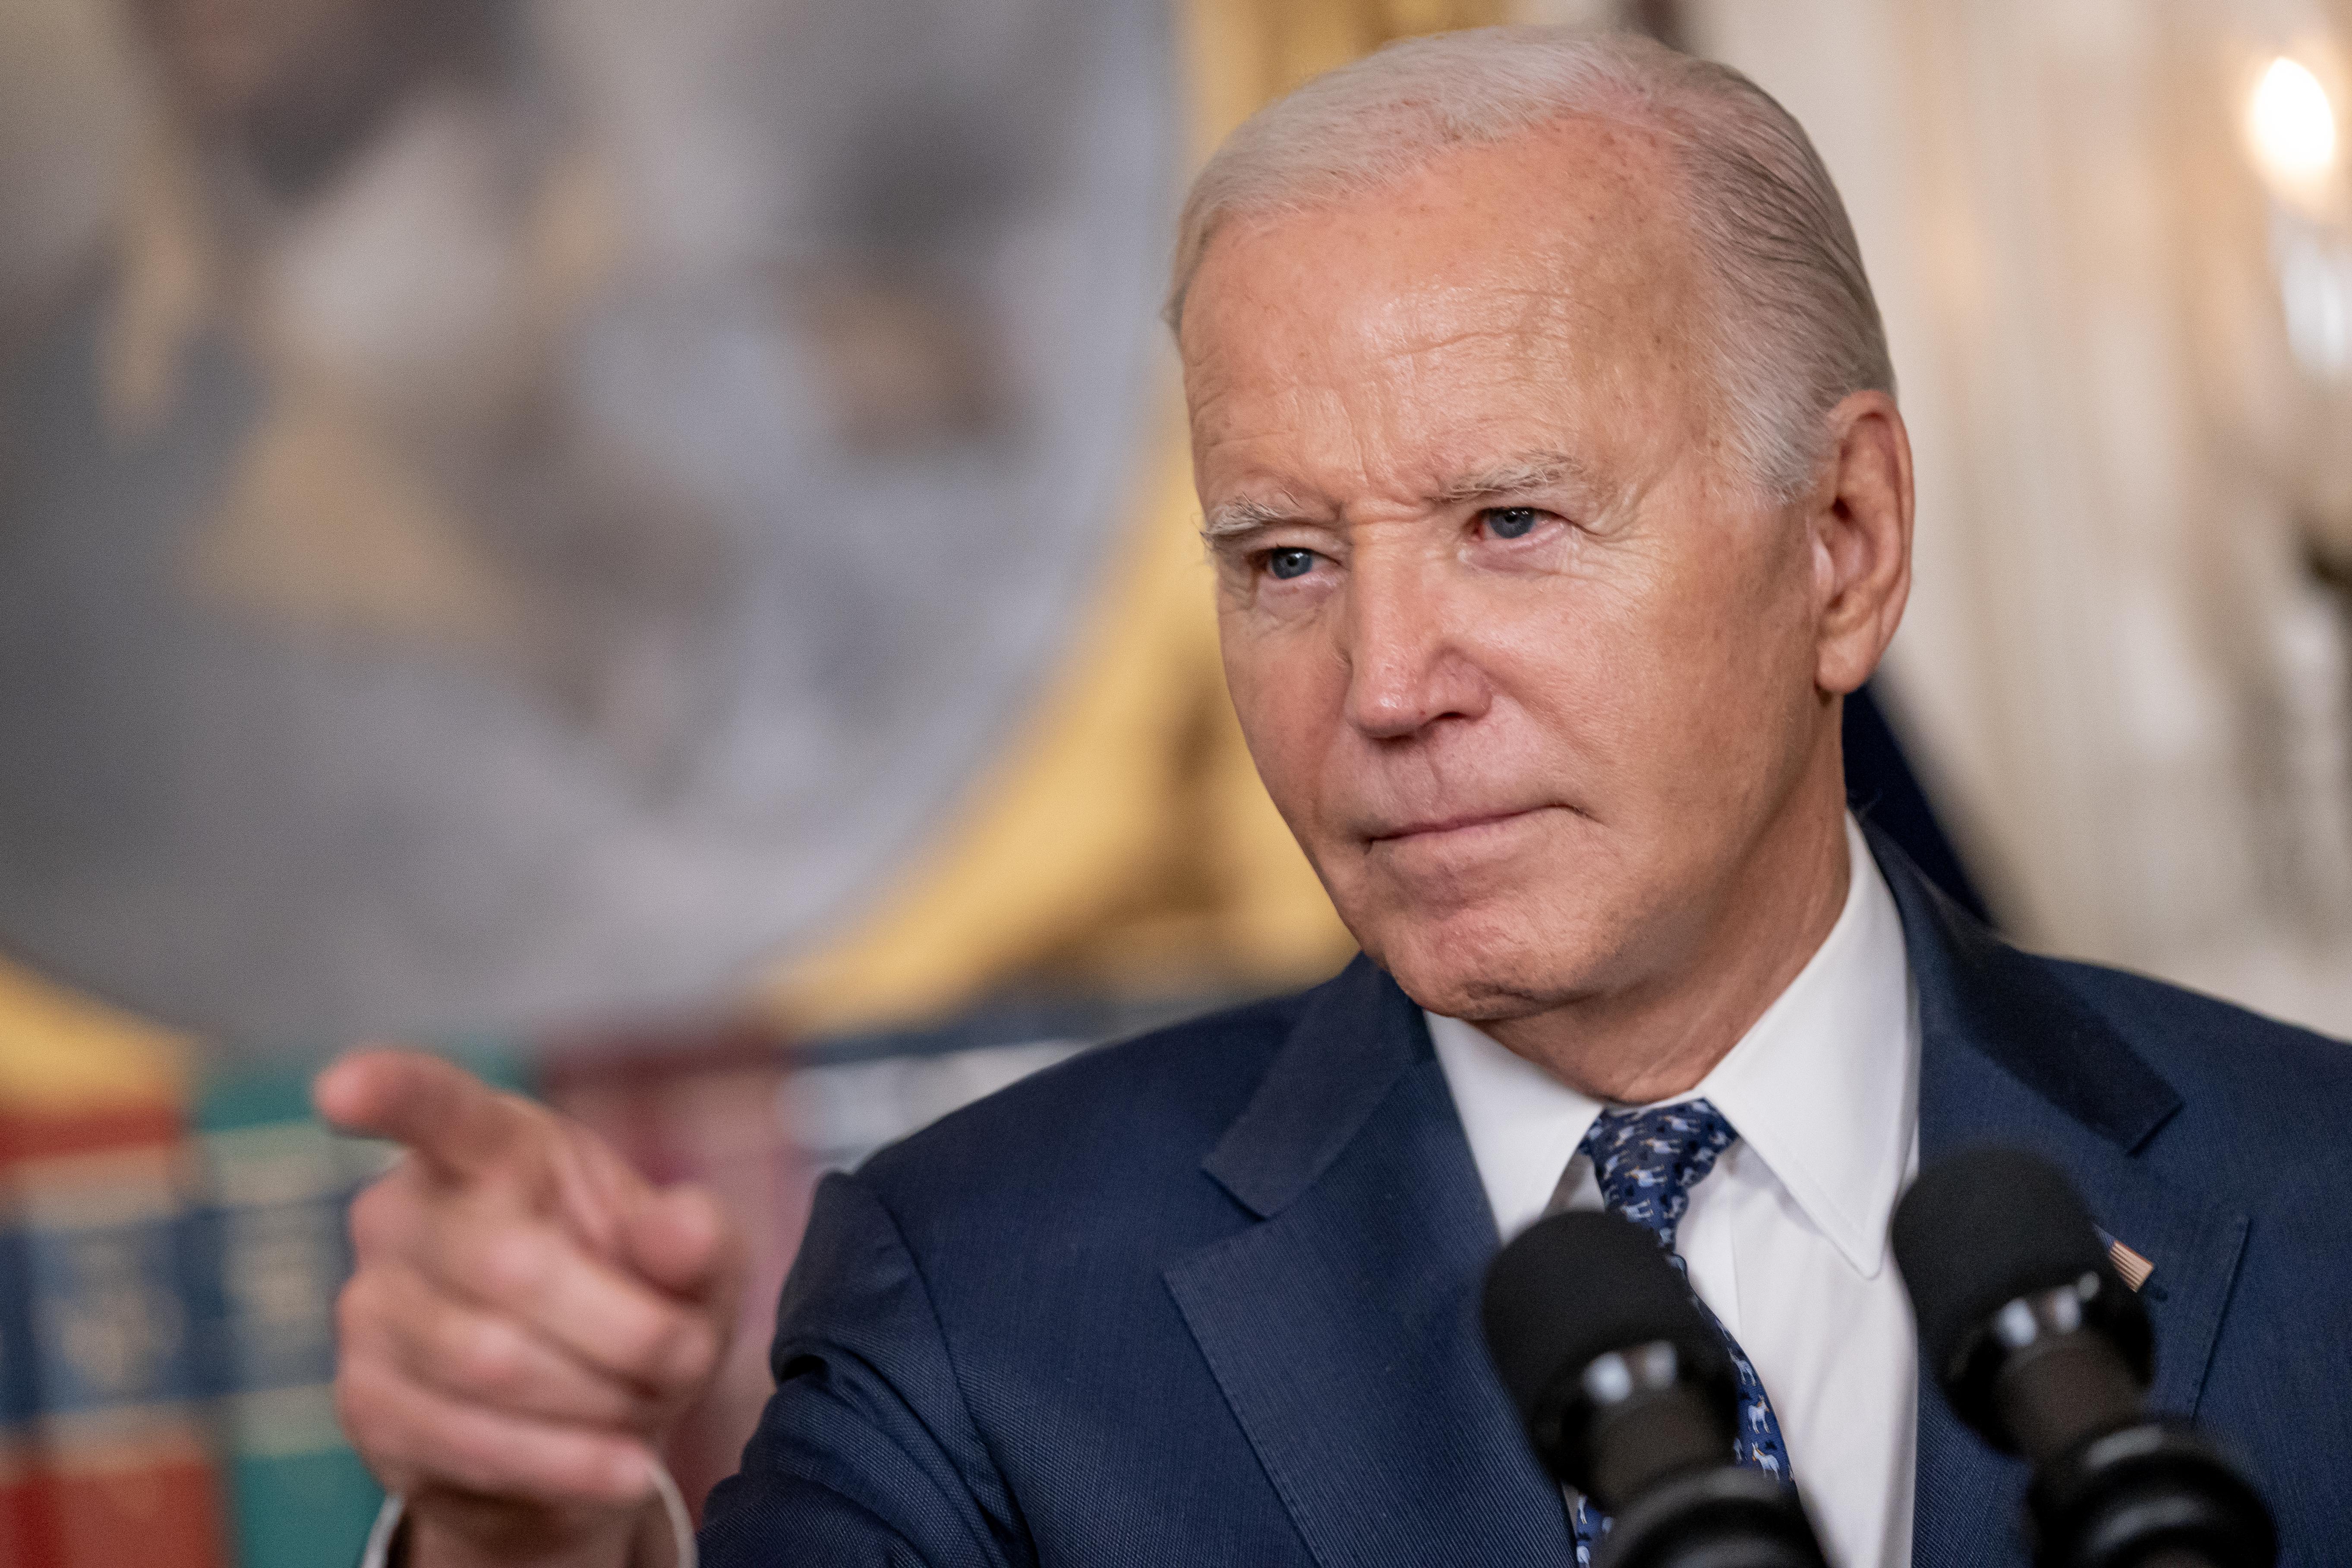 The Slatest for Feb. 9: Joe Biden Has Always Been Gaffe-y. So How Bad Is This, Really? Slate Staff